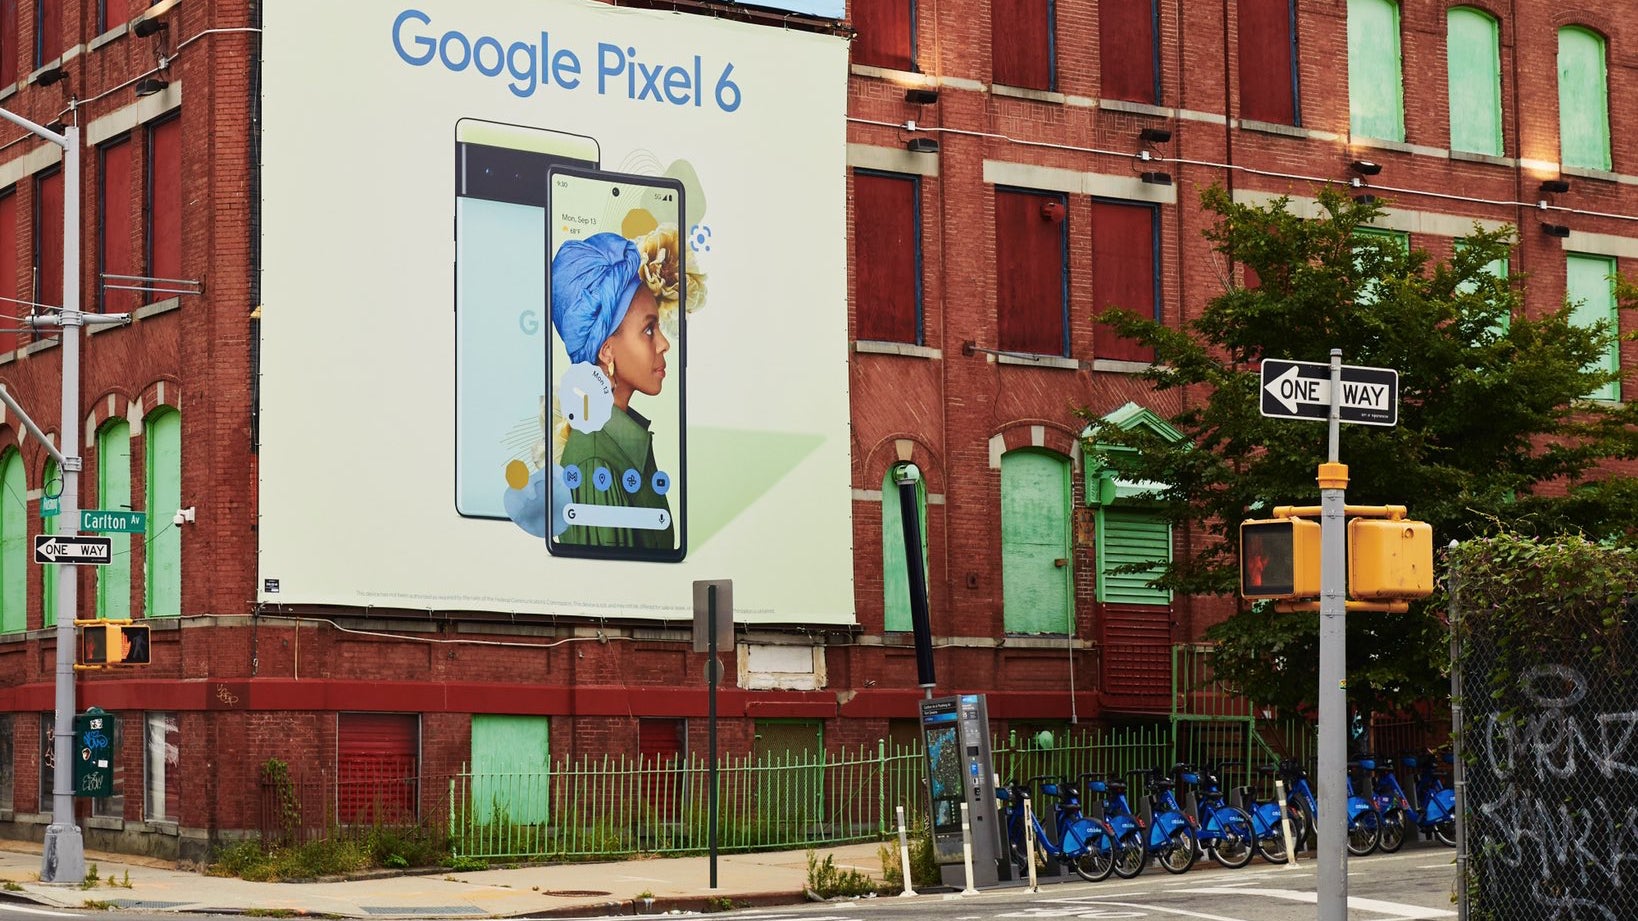 Pixel 6 could be the hottest flagship, if Google fixes this one Pixel camera issue!